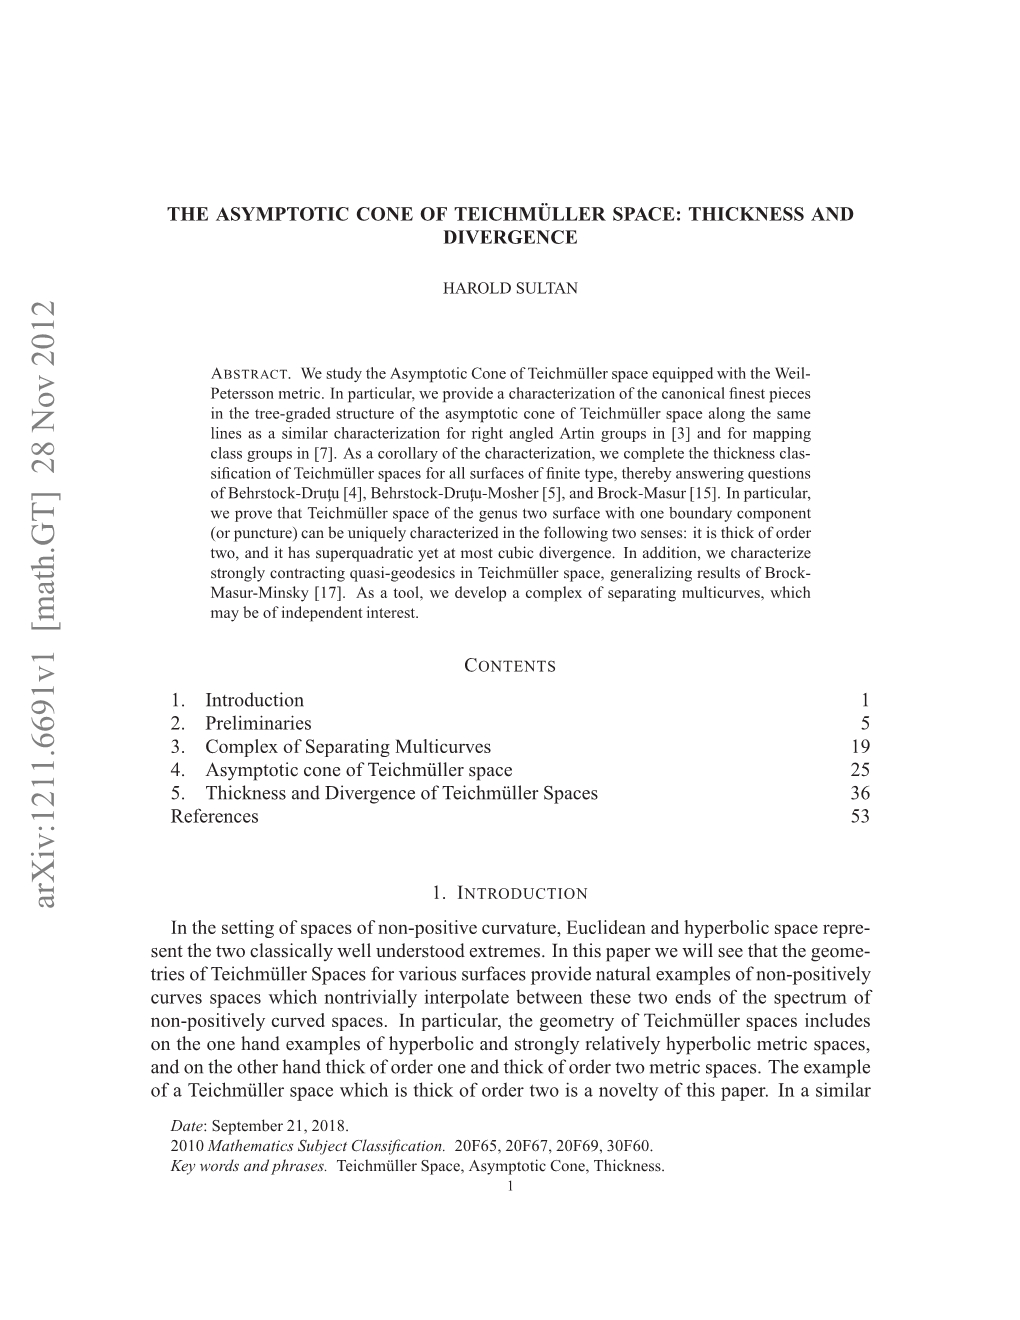 The Asymptotic Cone of Teichm\" Uller Space: Thickness and Divergence